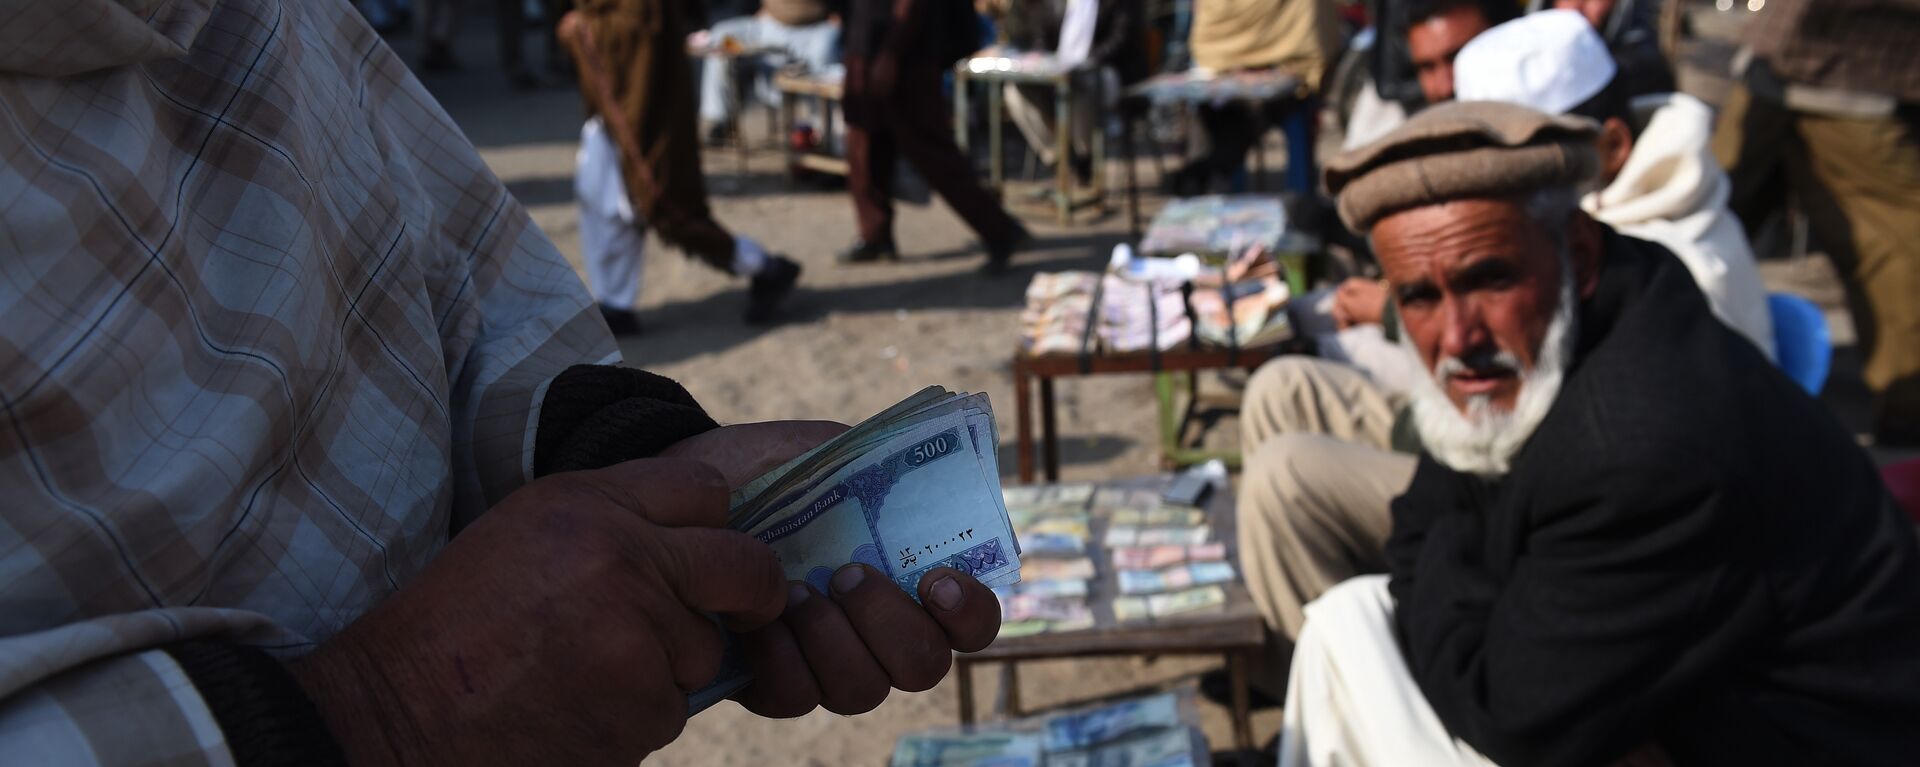 In this photograph taken on December 29, 2014, an Afghan customer (L) counts his Afghani currency notes at a currency exchange market along the roadside in Kabul - Sputnik International, 1920